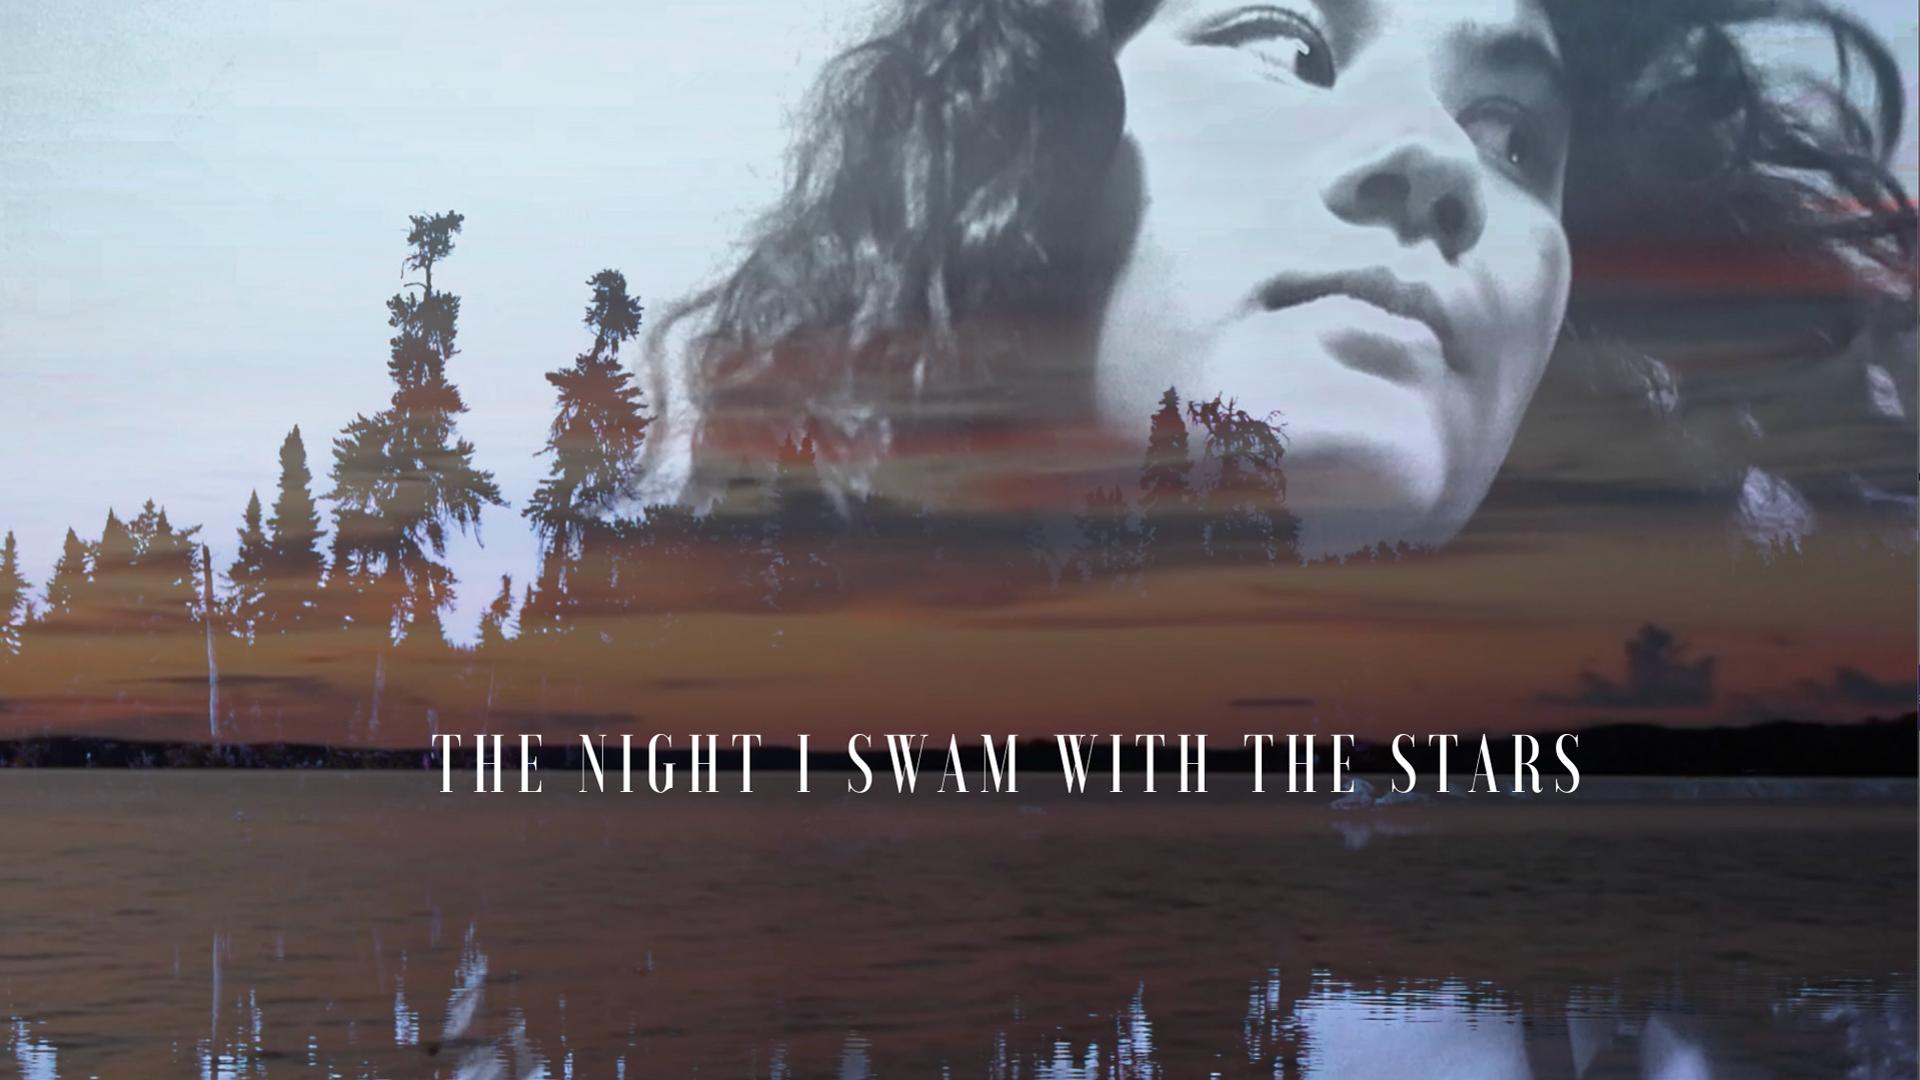 The Night I Swam With the Stars